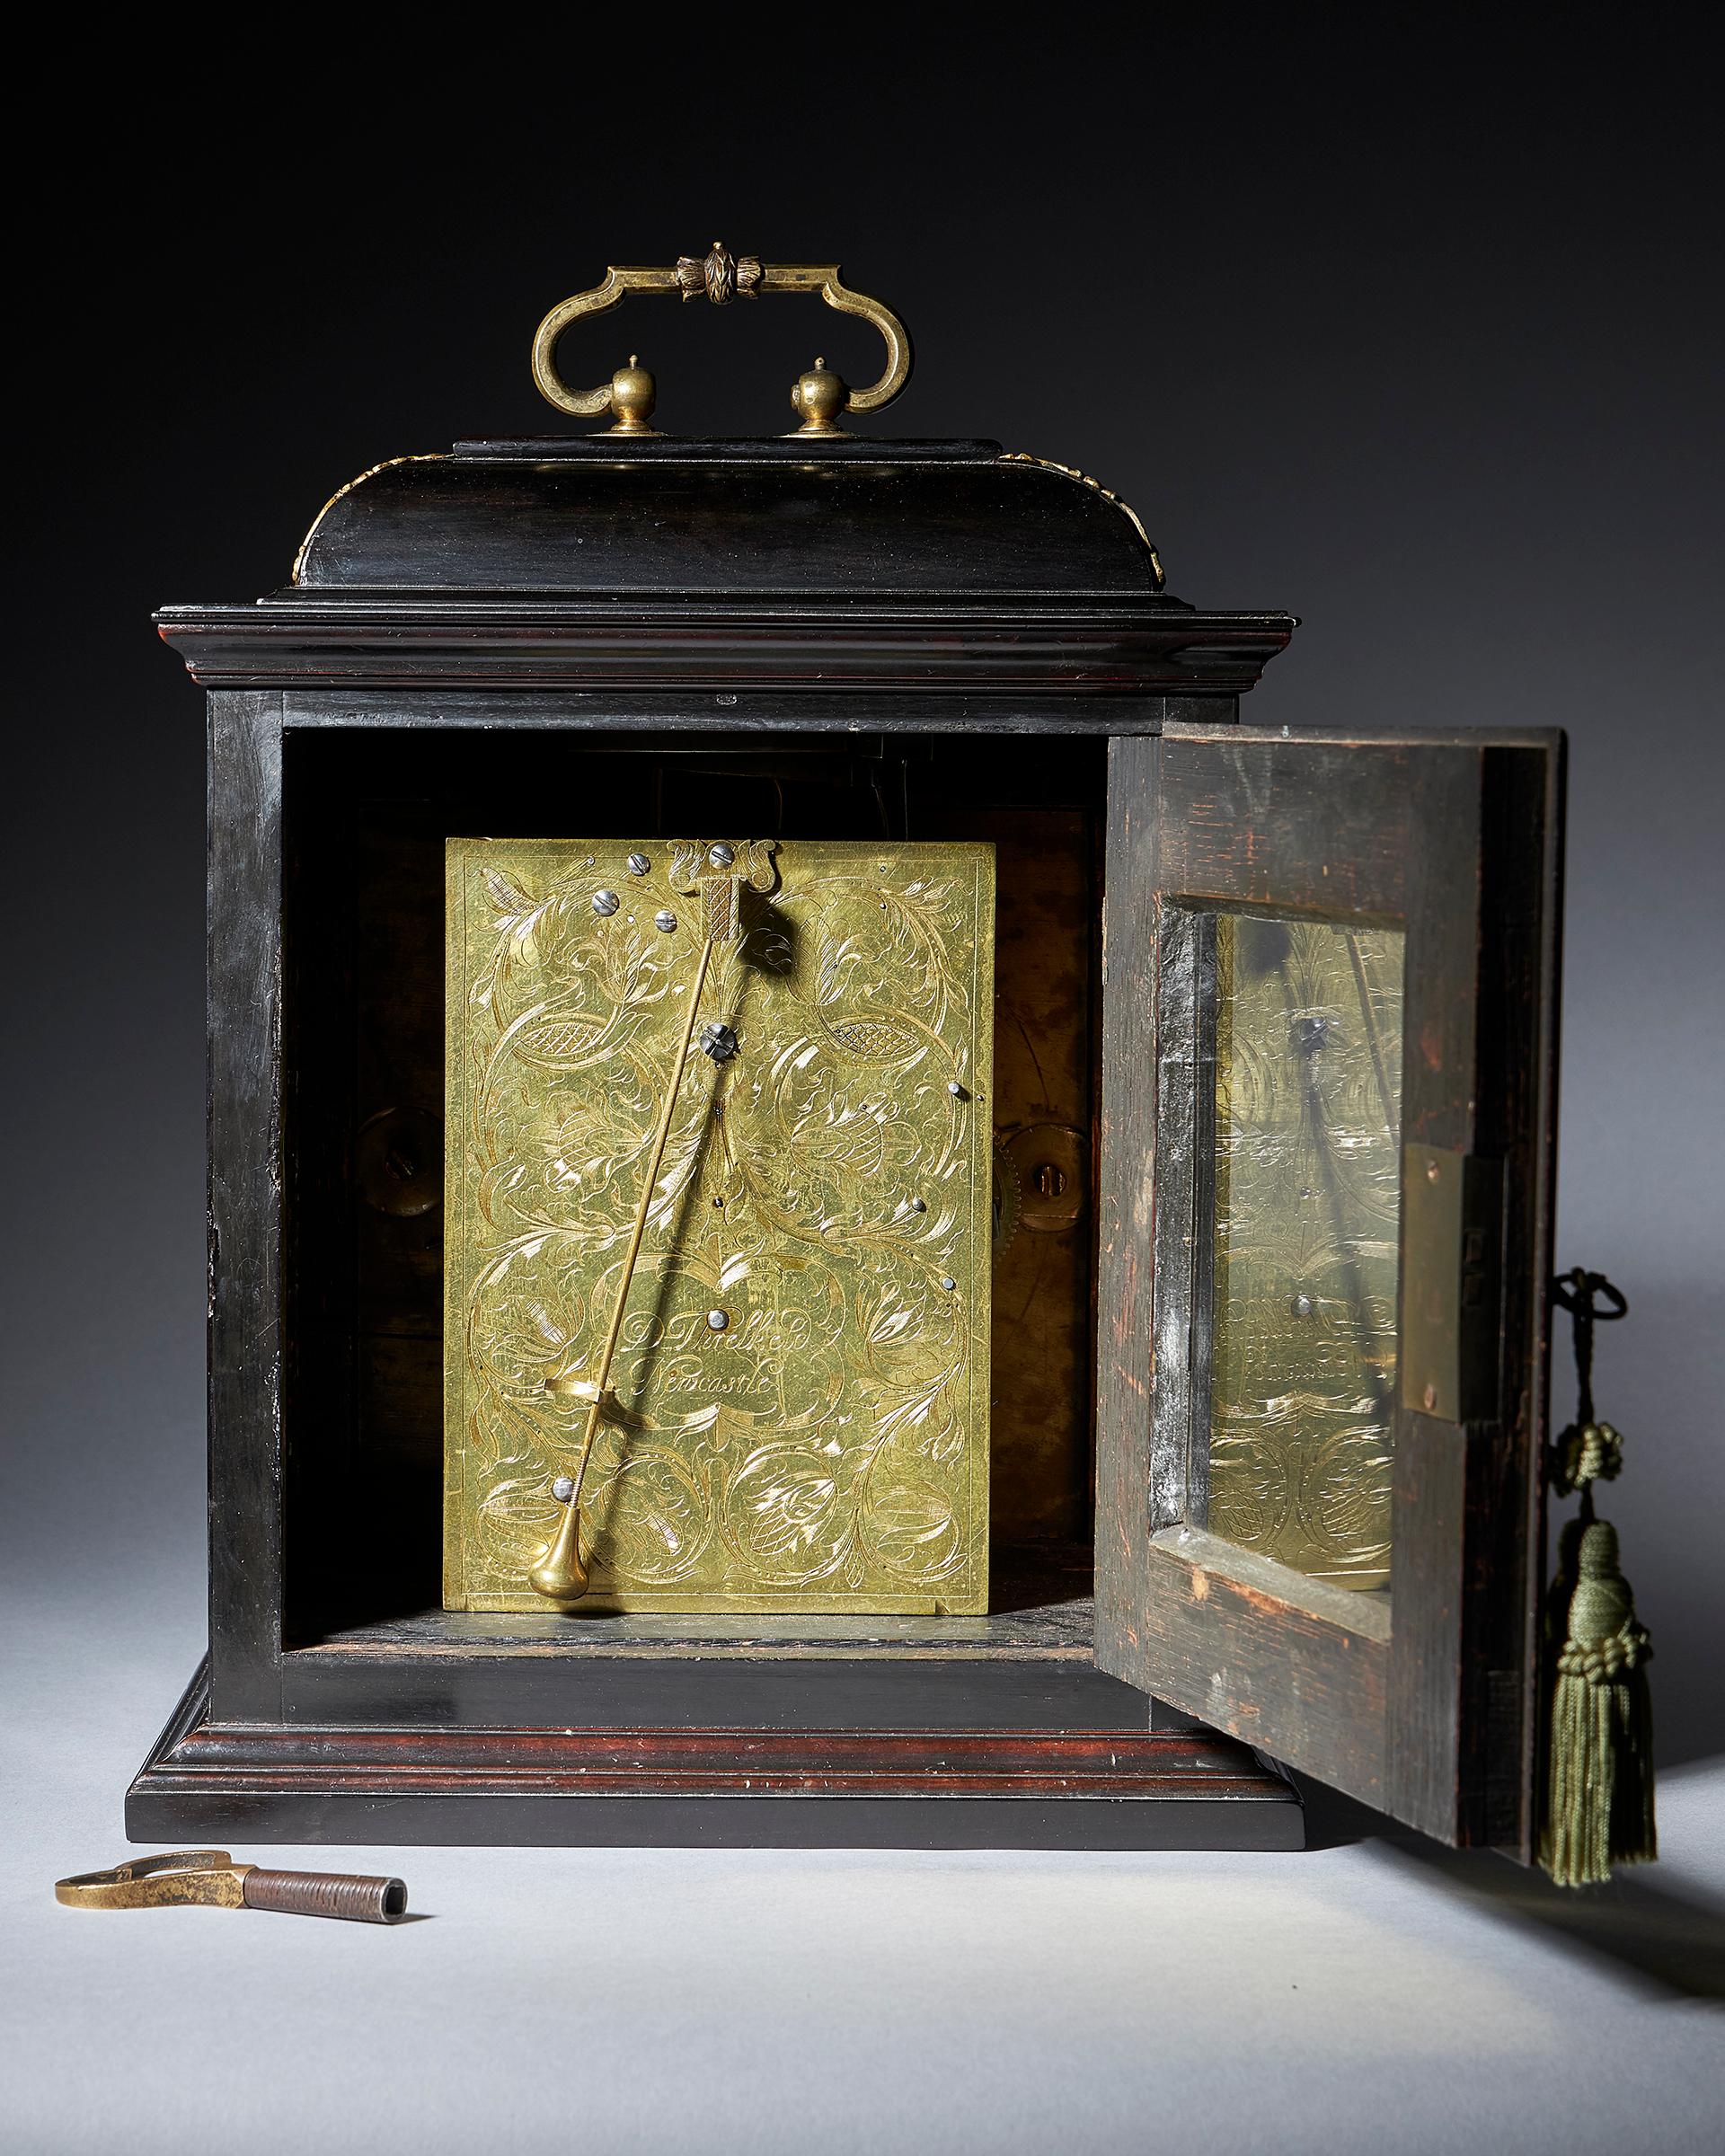 English Fine 17th Century Charles II Spring Driven Table Clock by Deodatus Threlkeld